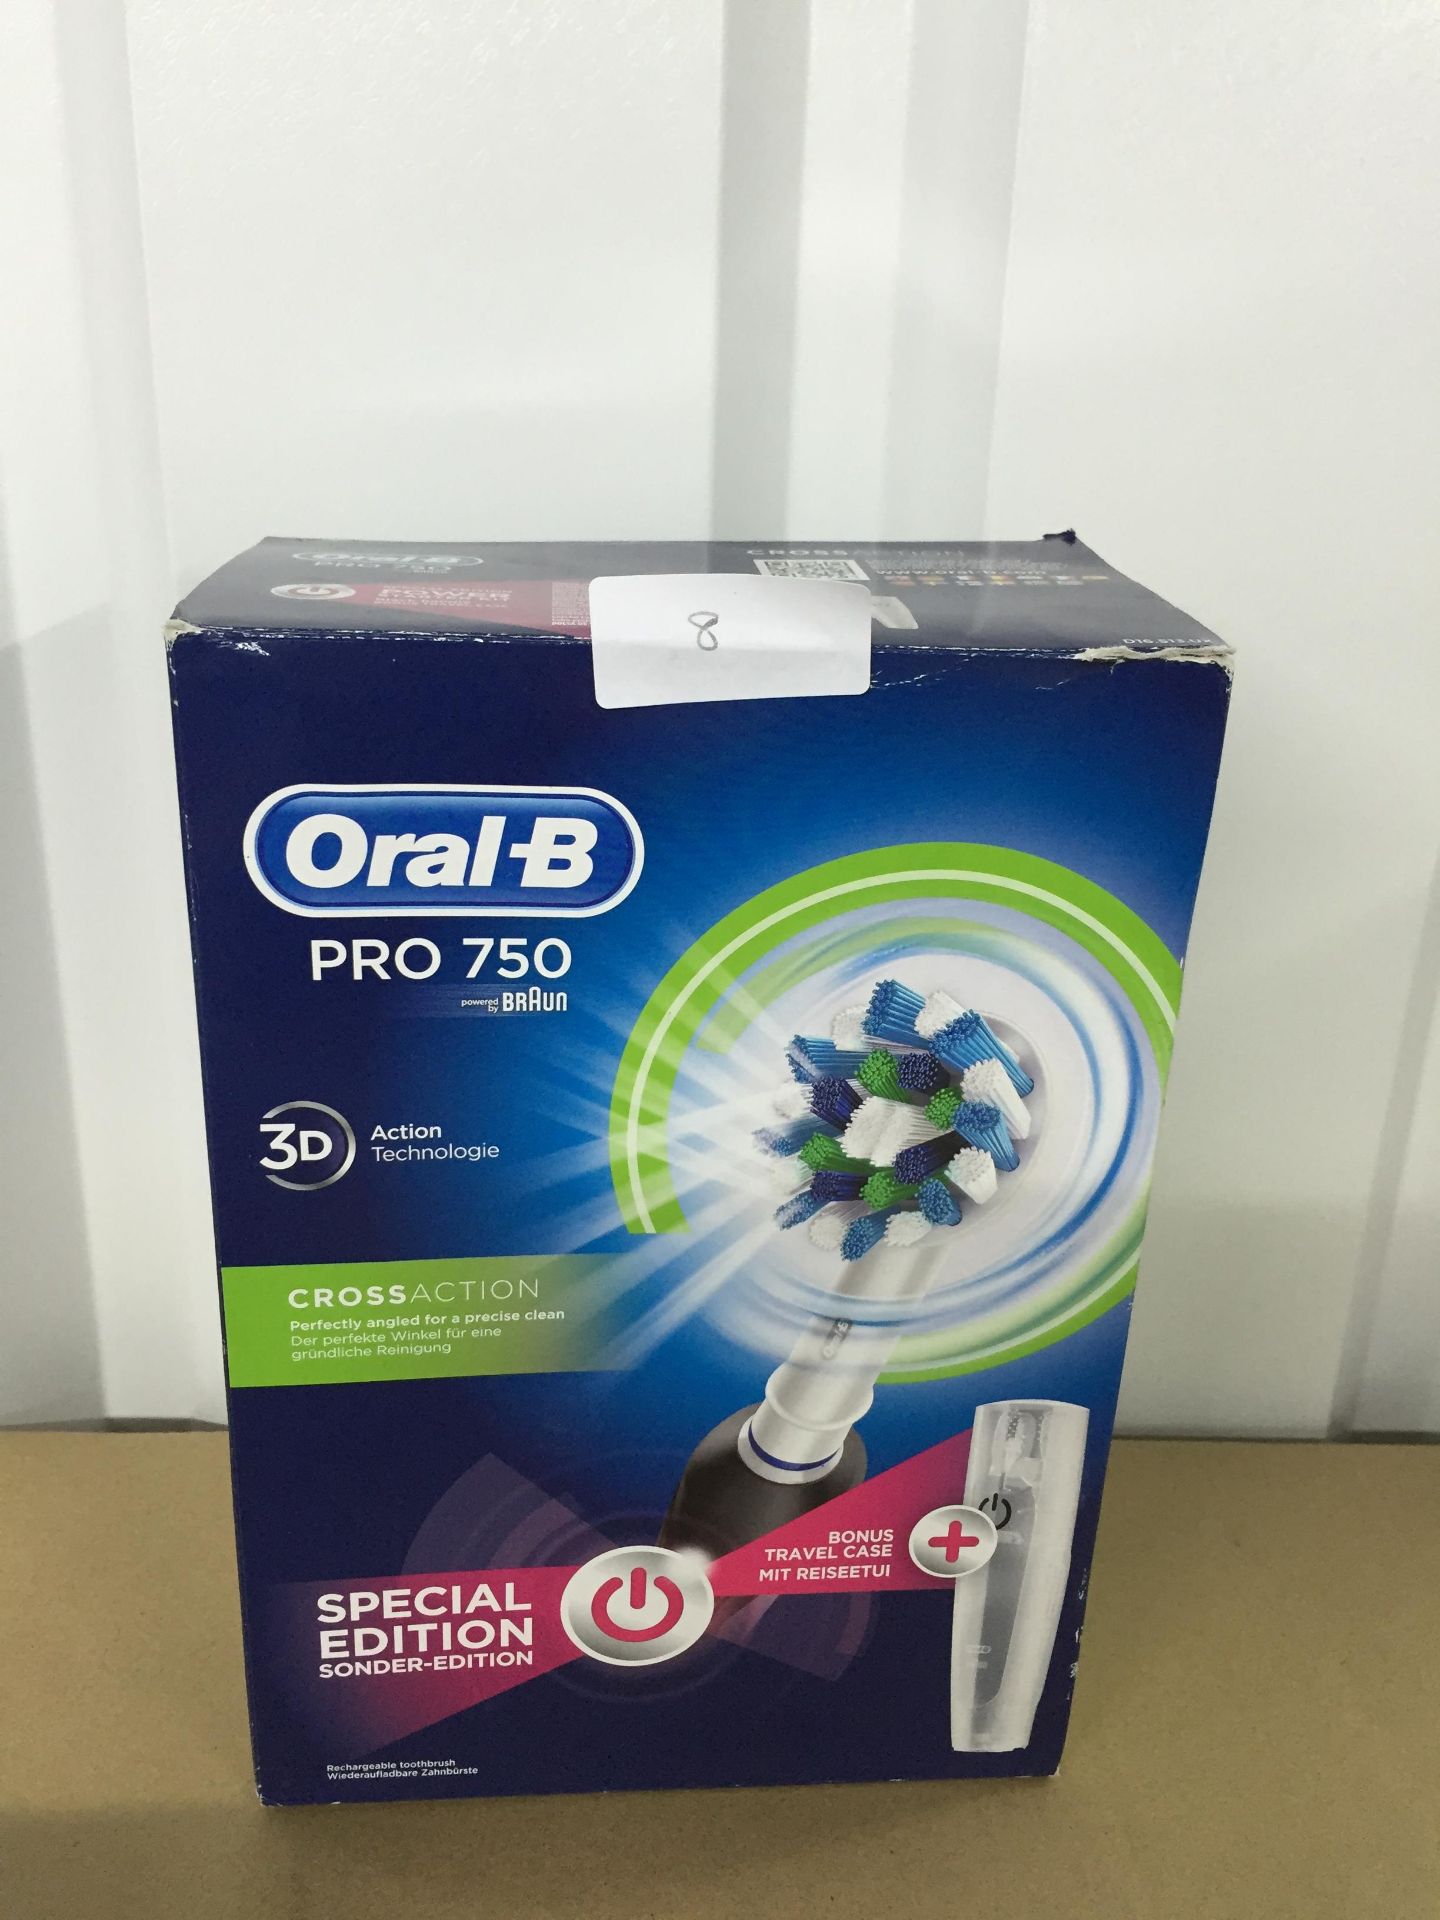 ORAL- B TOOTHBRUSH ELECTRIC PRO 750 3D CROSSACTION + travel case